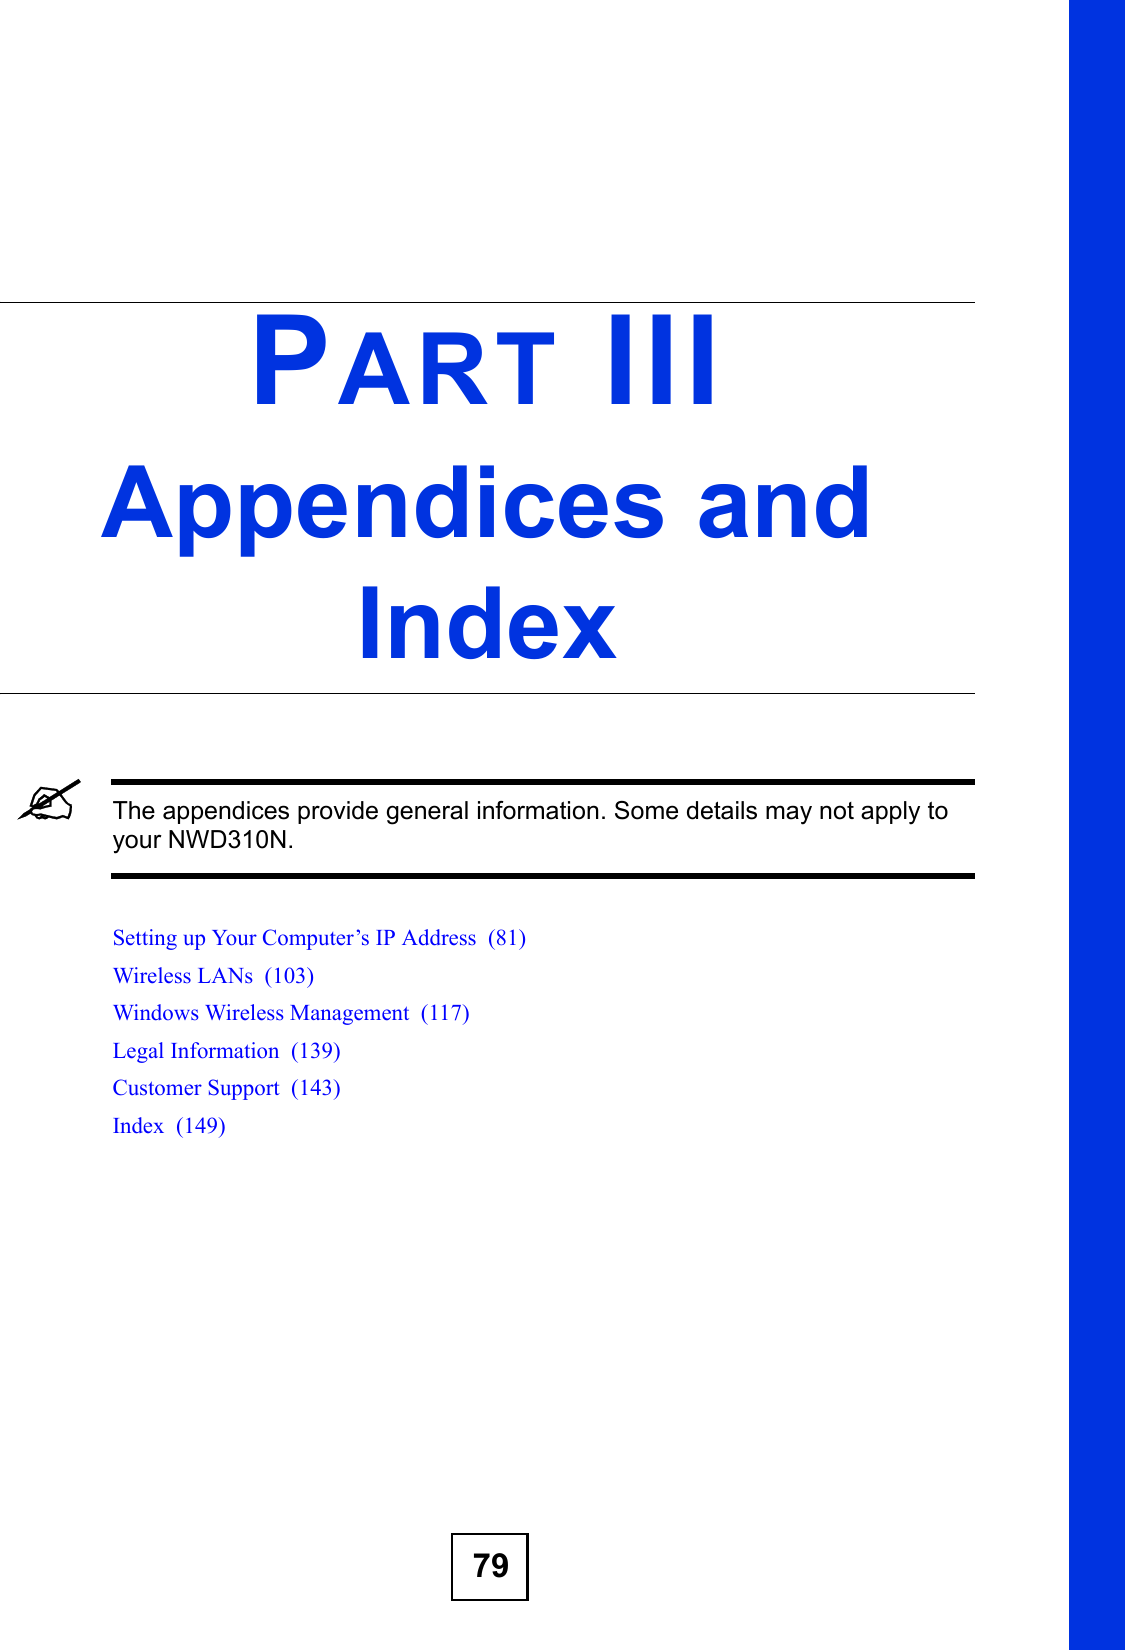 79PART IIIAppendices and Index&quot;The appendices provide general information. Some details may not apply to your NWD310N.Setting up Your Computer’s IP Address  (81)Wireless LANs  (103)Windows Wireless Management  (117)Legal Information  (139)Customer Support  (143)Index  (149)